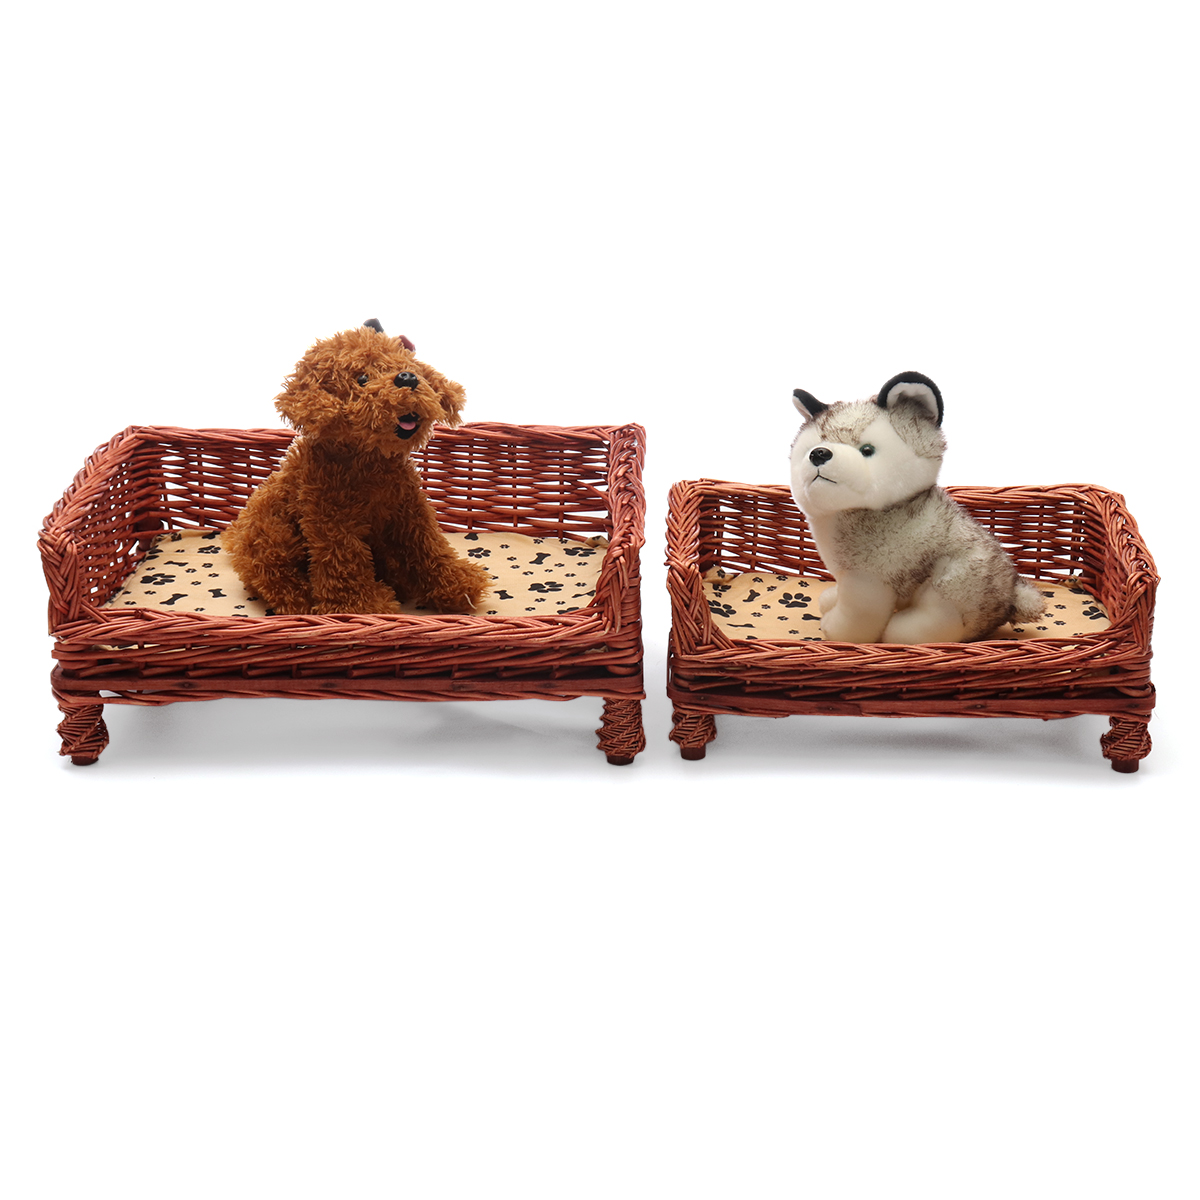 HAND-WOVEN-Wicker-Pet-Bed-Dog-Cat-Basket-Shabby-Chic-Sleeping-Durable-Washable-1640468-4